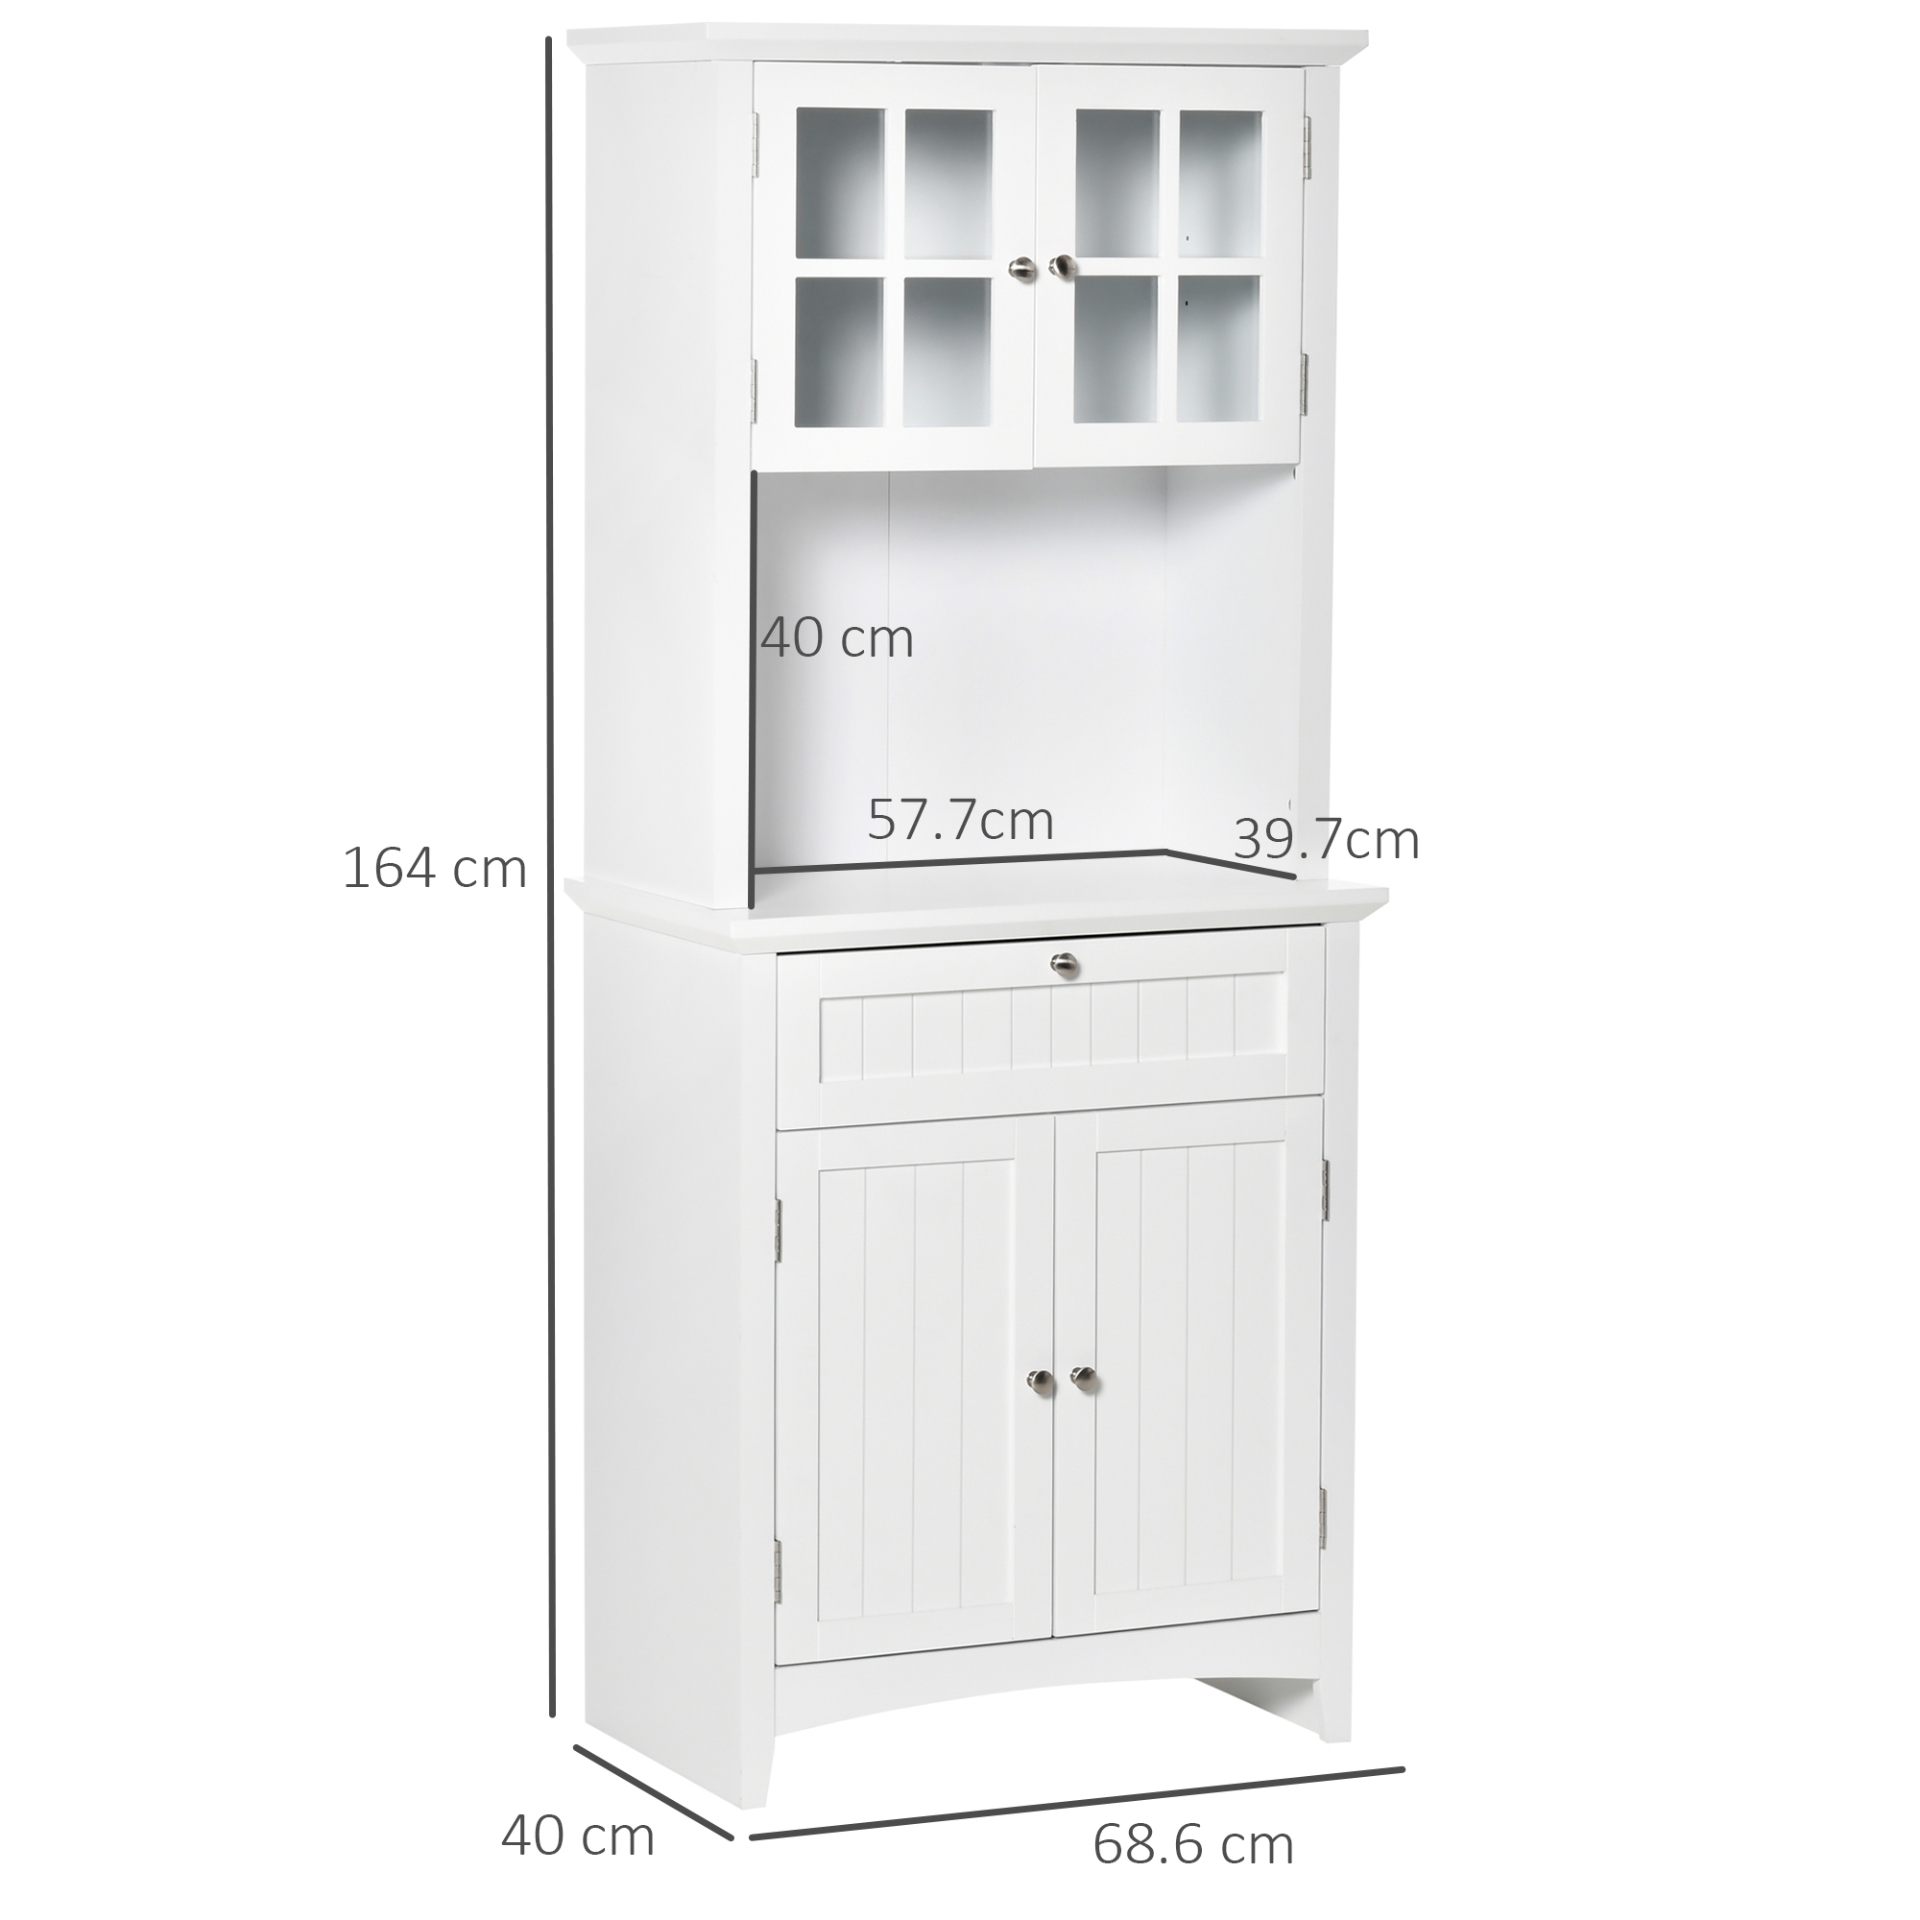 HOMCOM Kitchen Cupboard, Wooden Storage Cabinet with Framed Glass Door, Drawer, Microwave Space for Dining and Living Room, White